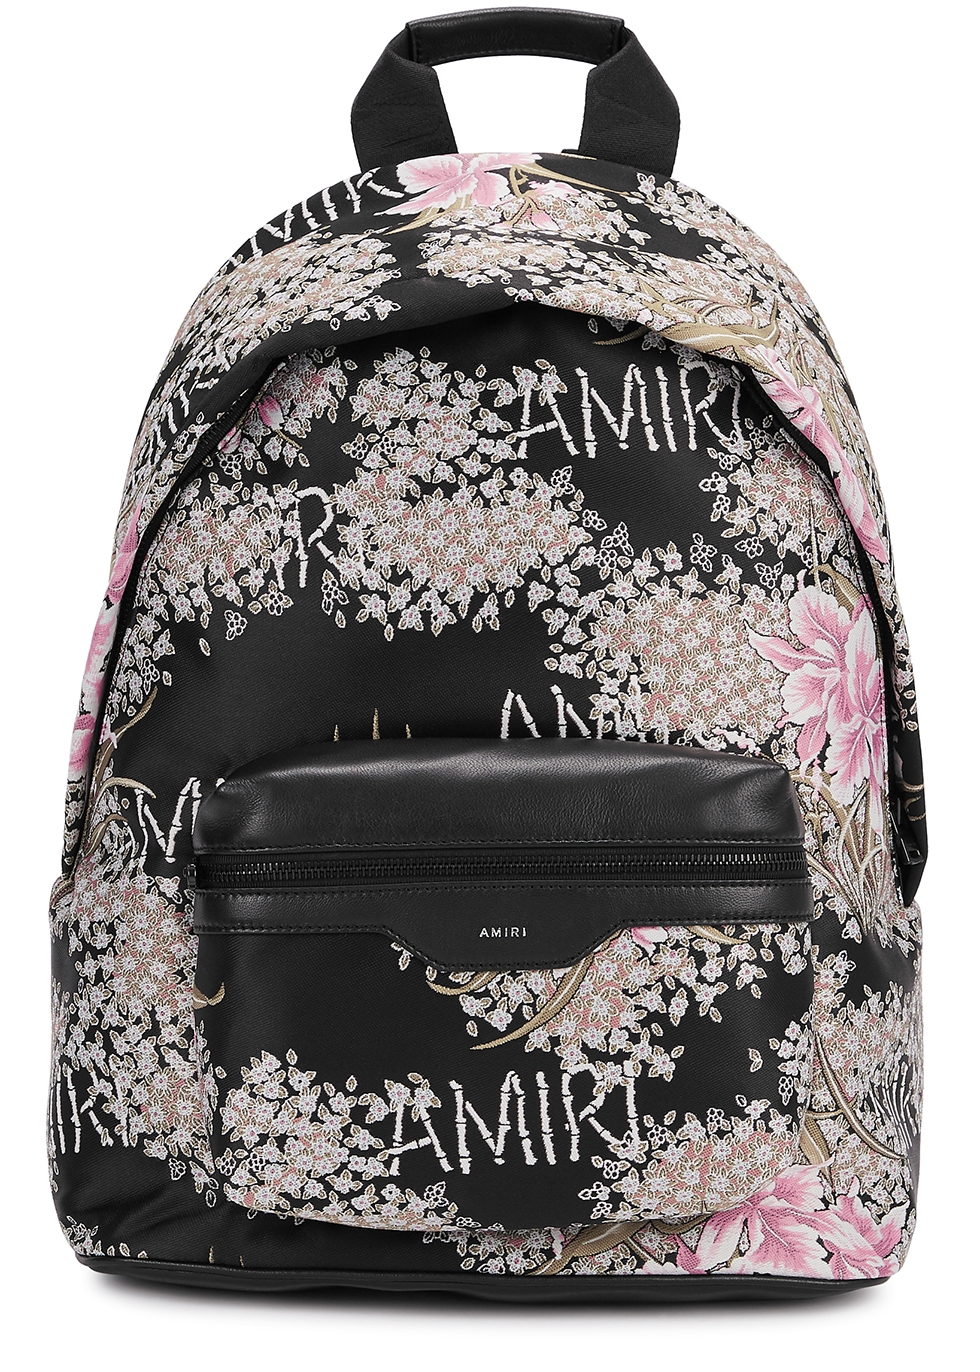 Hibiscus floral-jacquard twill backpack